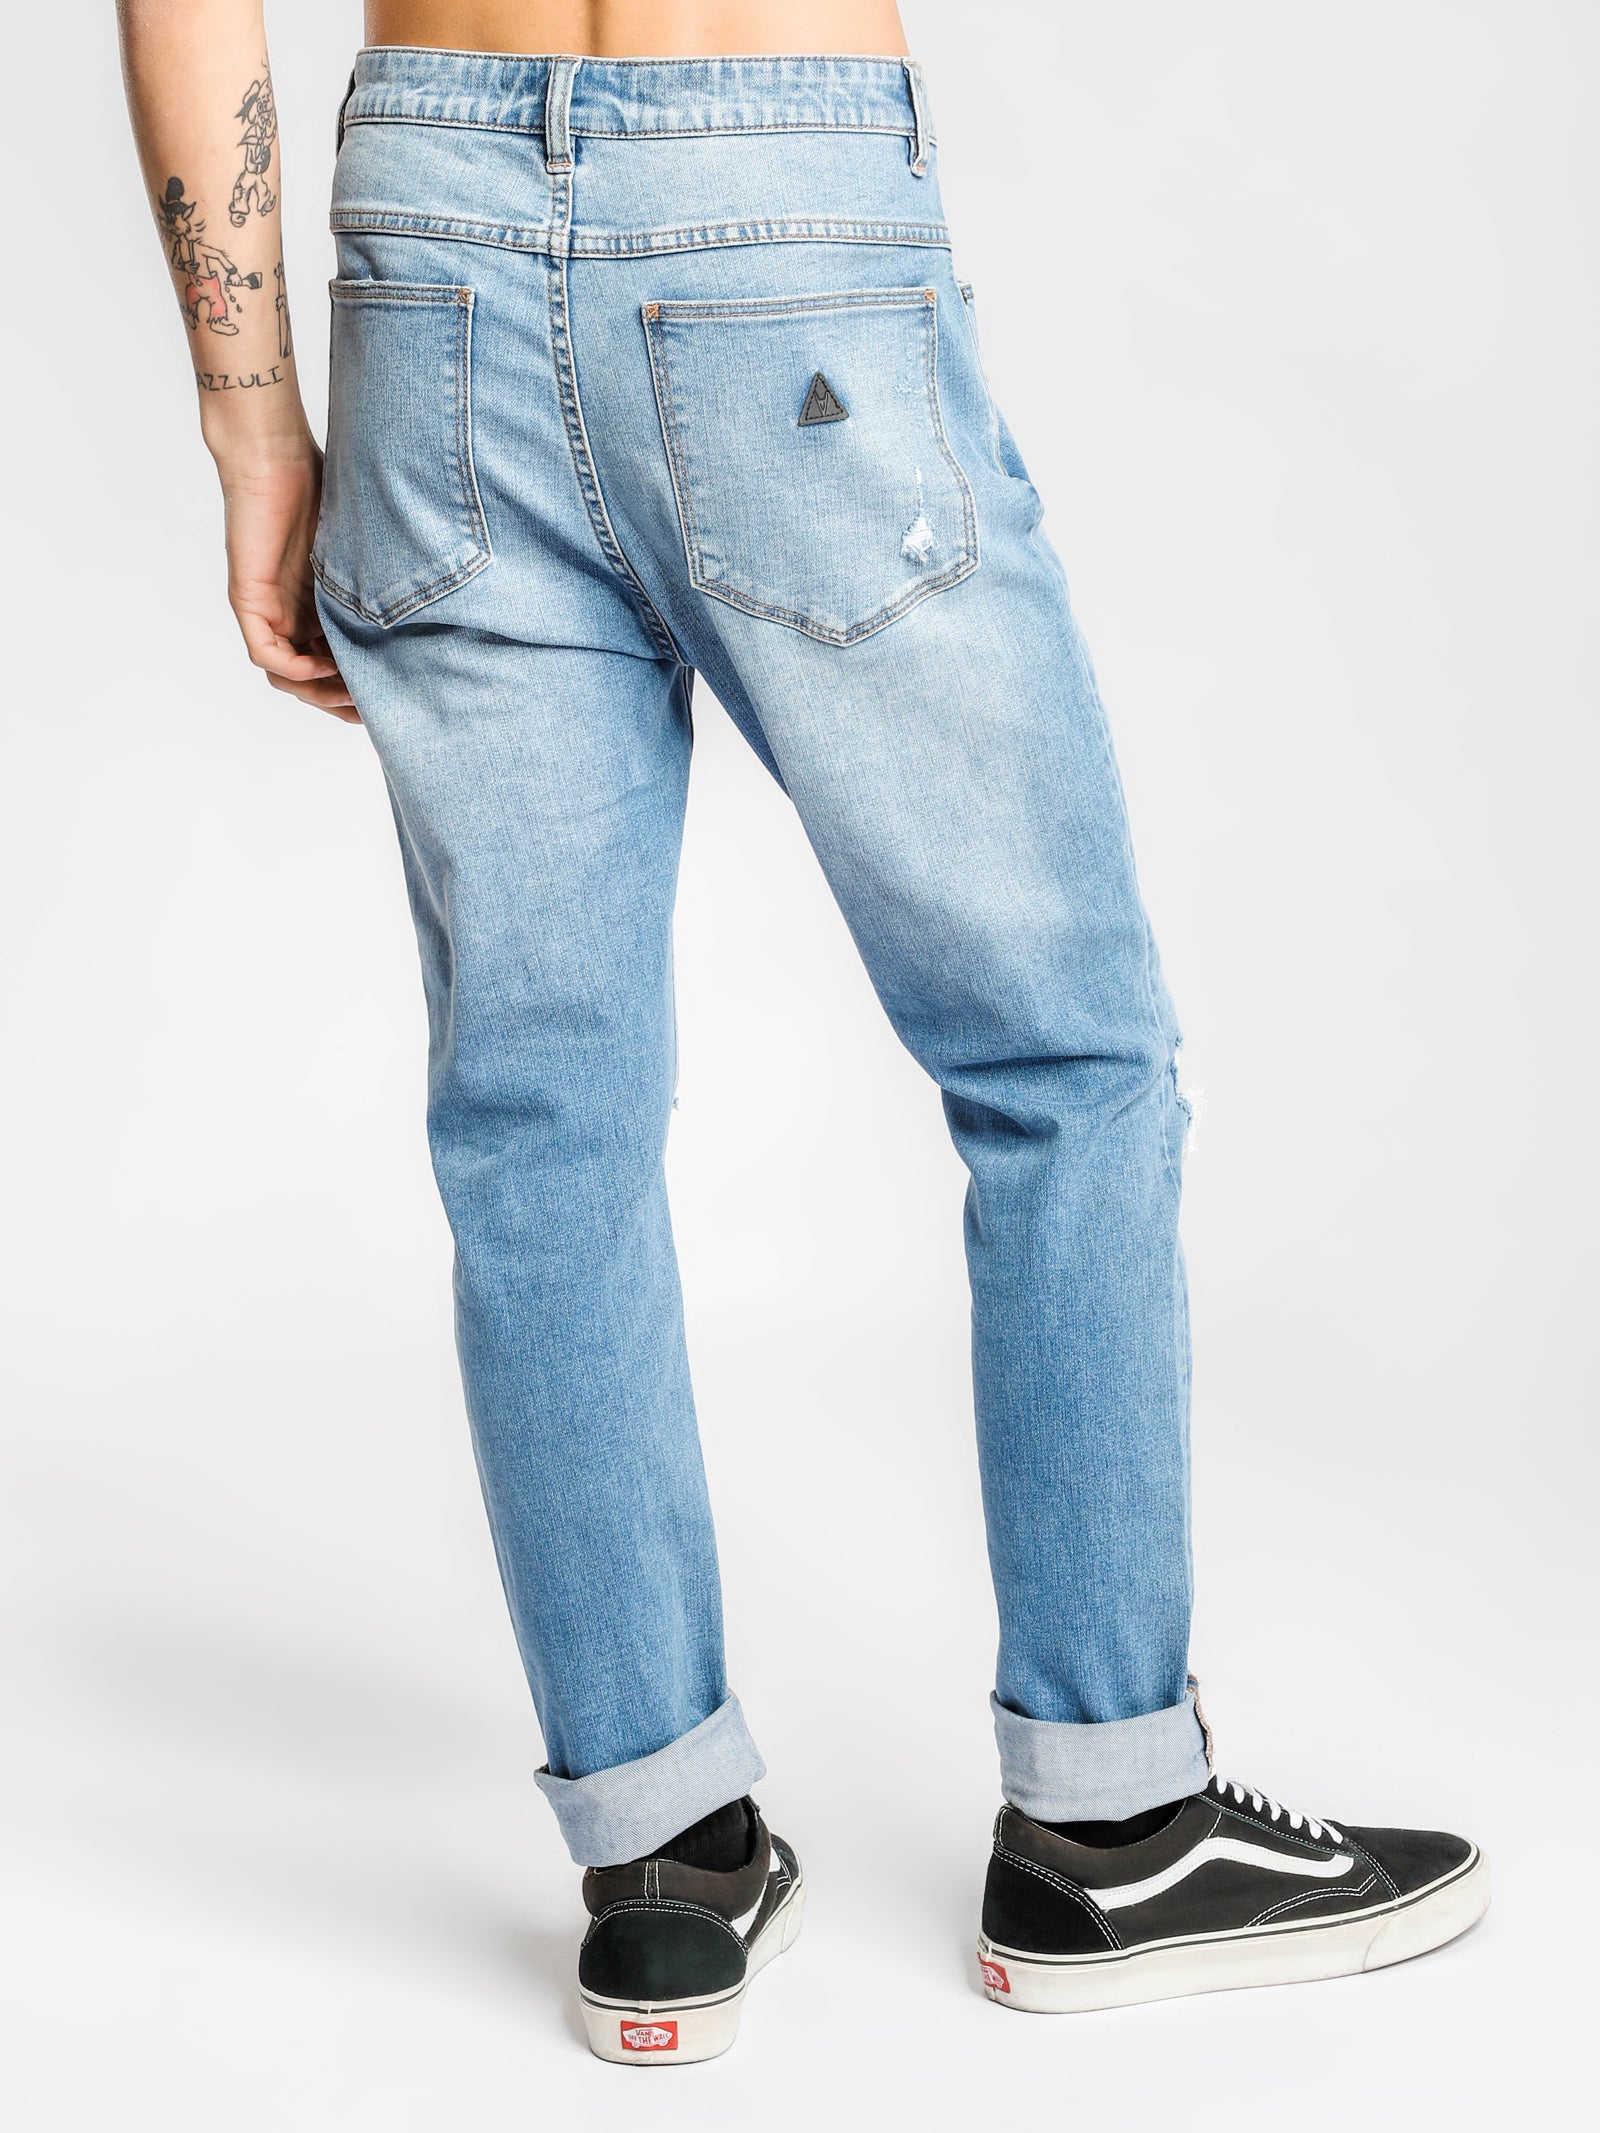 A Dropped Skinny Turn Up Jeans in Chalk Indigo - Glue Store